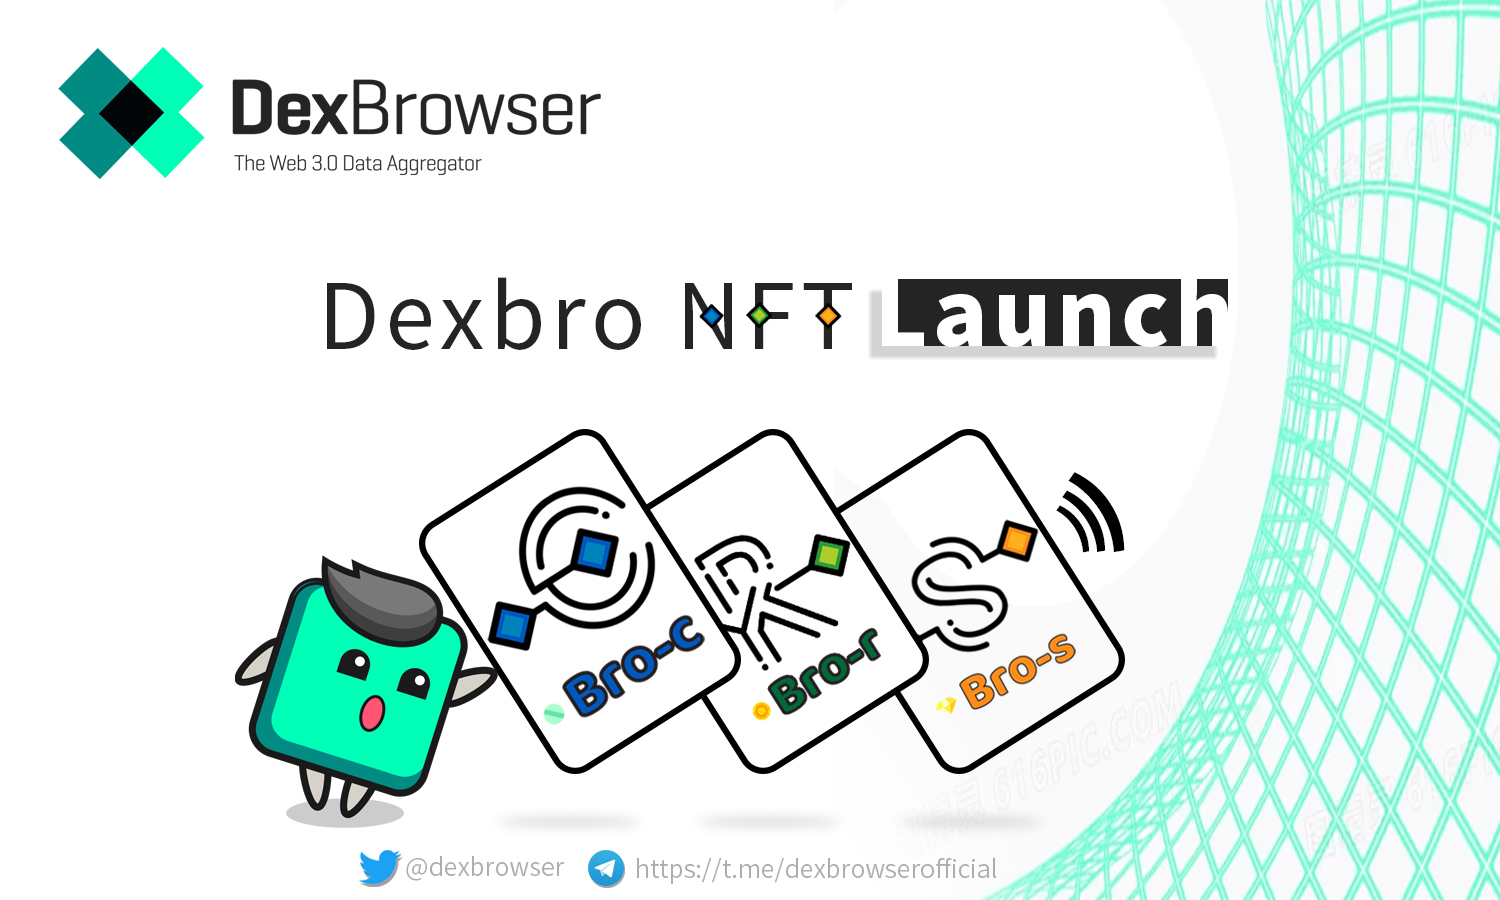 Things You Need to Know Before Minting the Dexbrowser NFTs